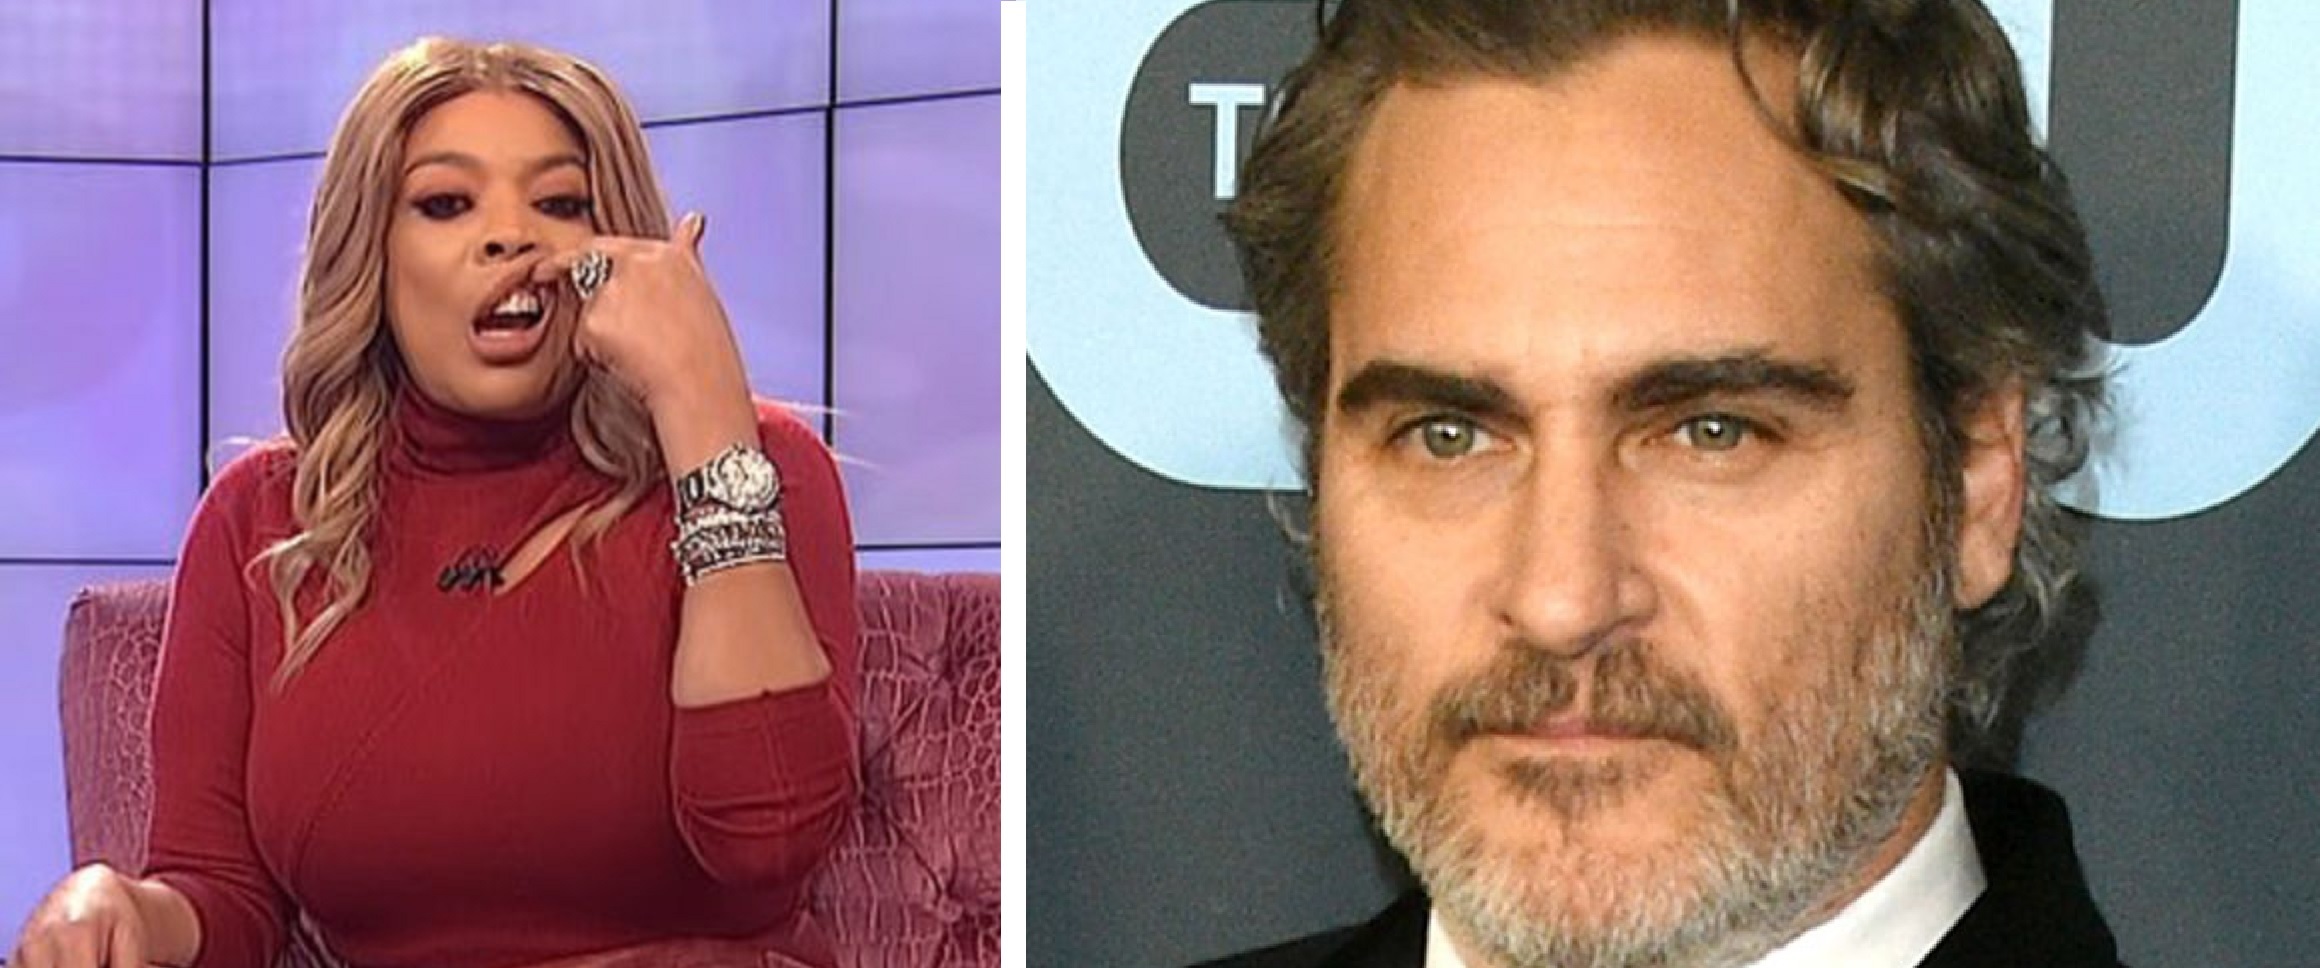 Wendy Williams Apologizes To Joaquin Phoenix After Making Fun Of His ...